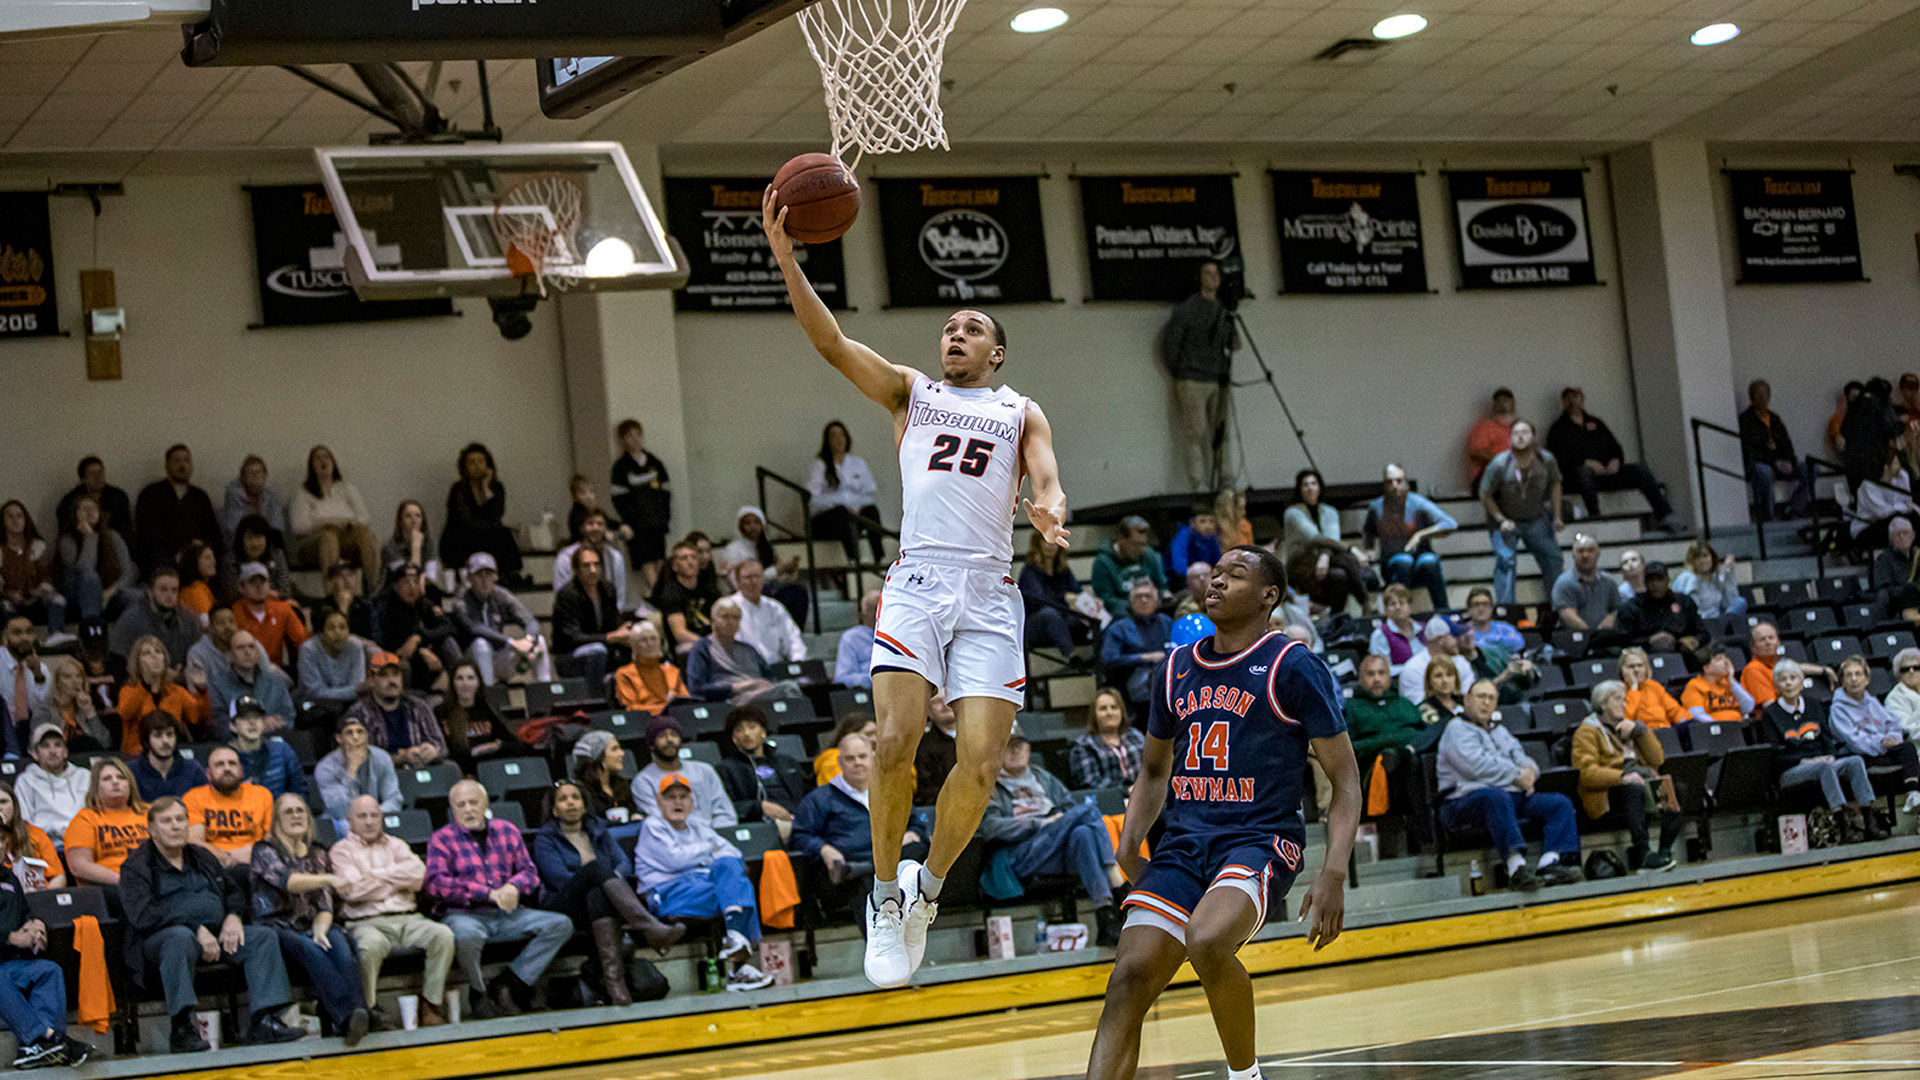 Dillon Smith scored 22 points to lead Tusculum to a 62-52 home win over Carson-Newman (photo by Chuck Williams)